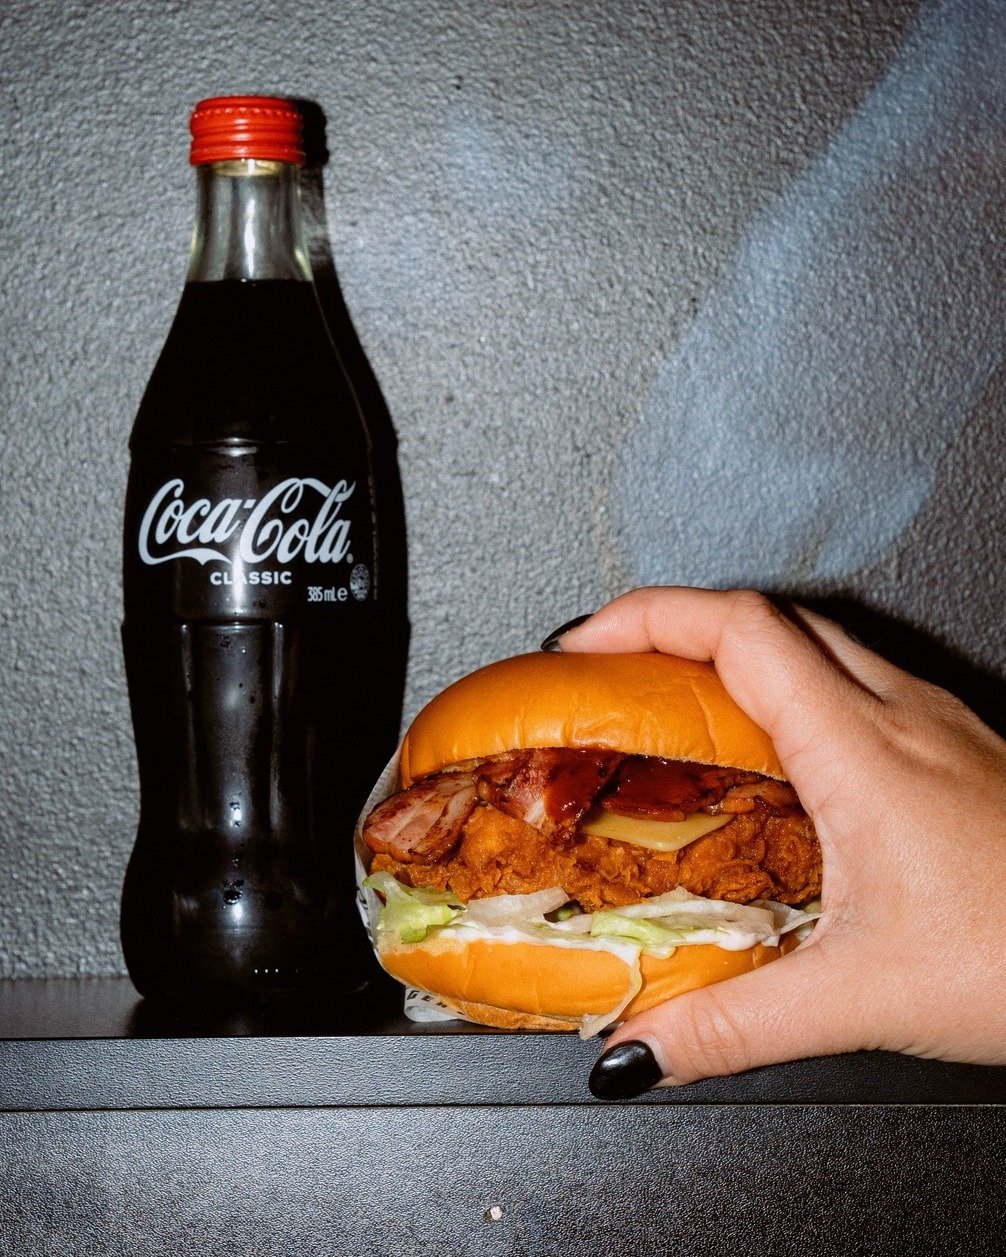 Picture this: you've just sunk your teeth into the perfect Butch Cassidy bite - juicy, flavourful, and oh-so-satisfying. But as good as that first bite is, you know there's something missing... that perfect companion to wash it all down.

Enter Coke 